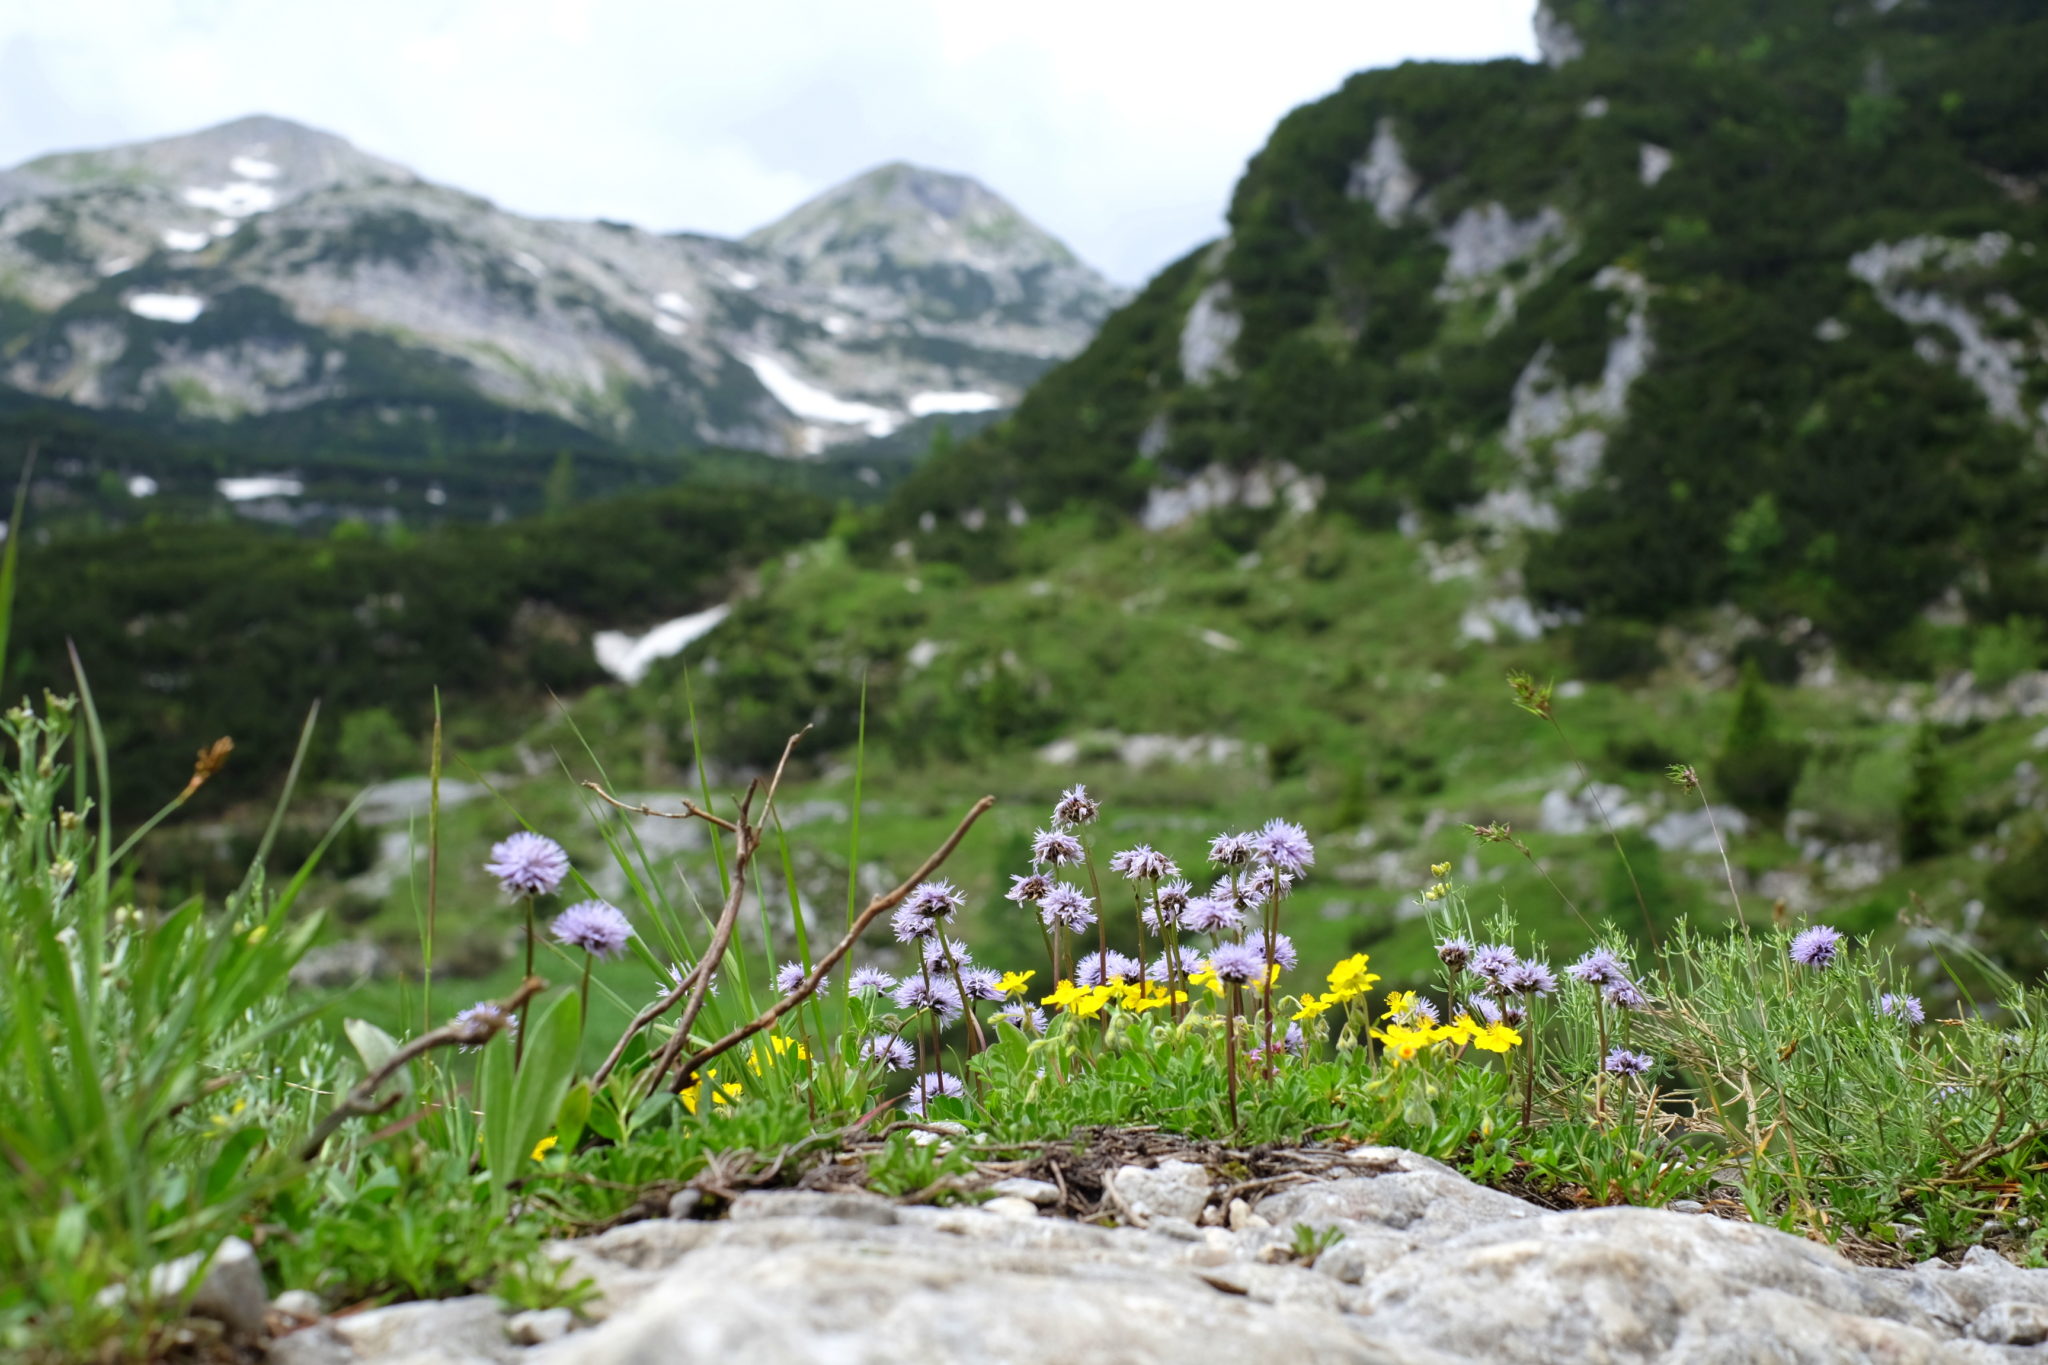 Flowers blooming on the way from Komna to Bogatin, Julian Alps, Slovenia, Triglav National Park